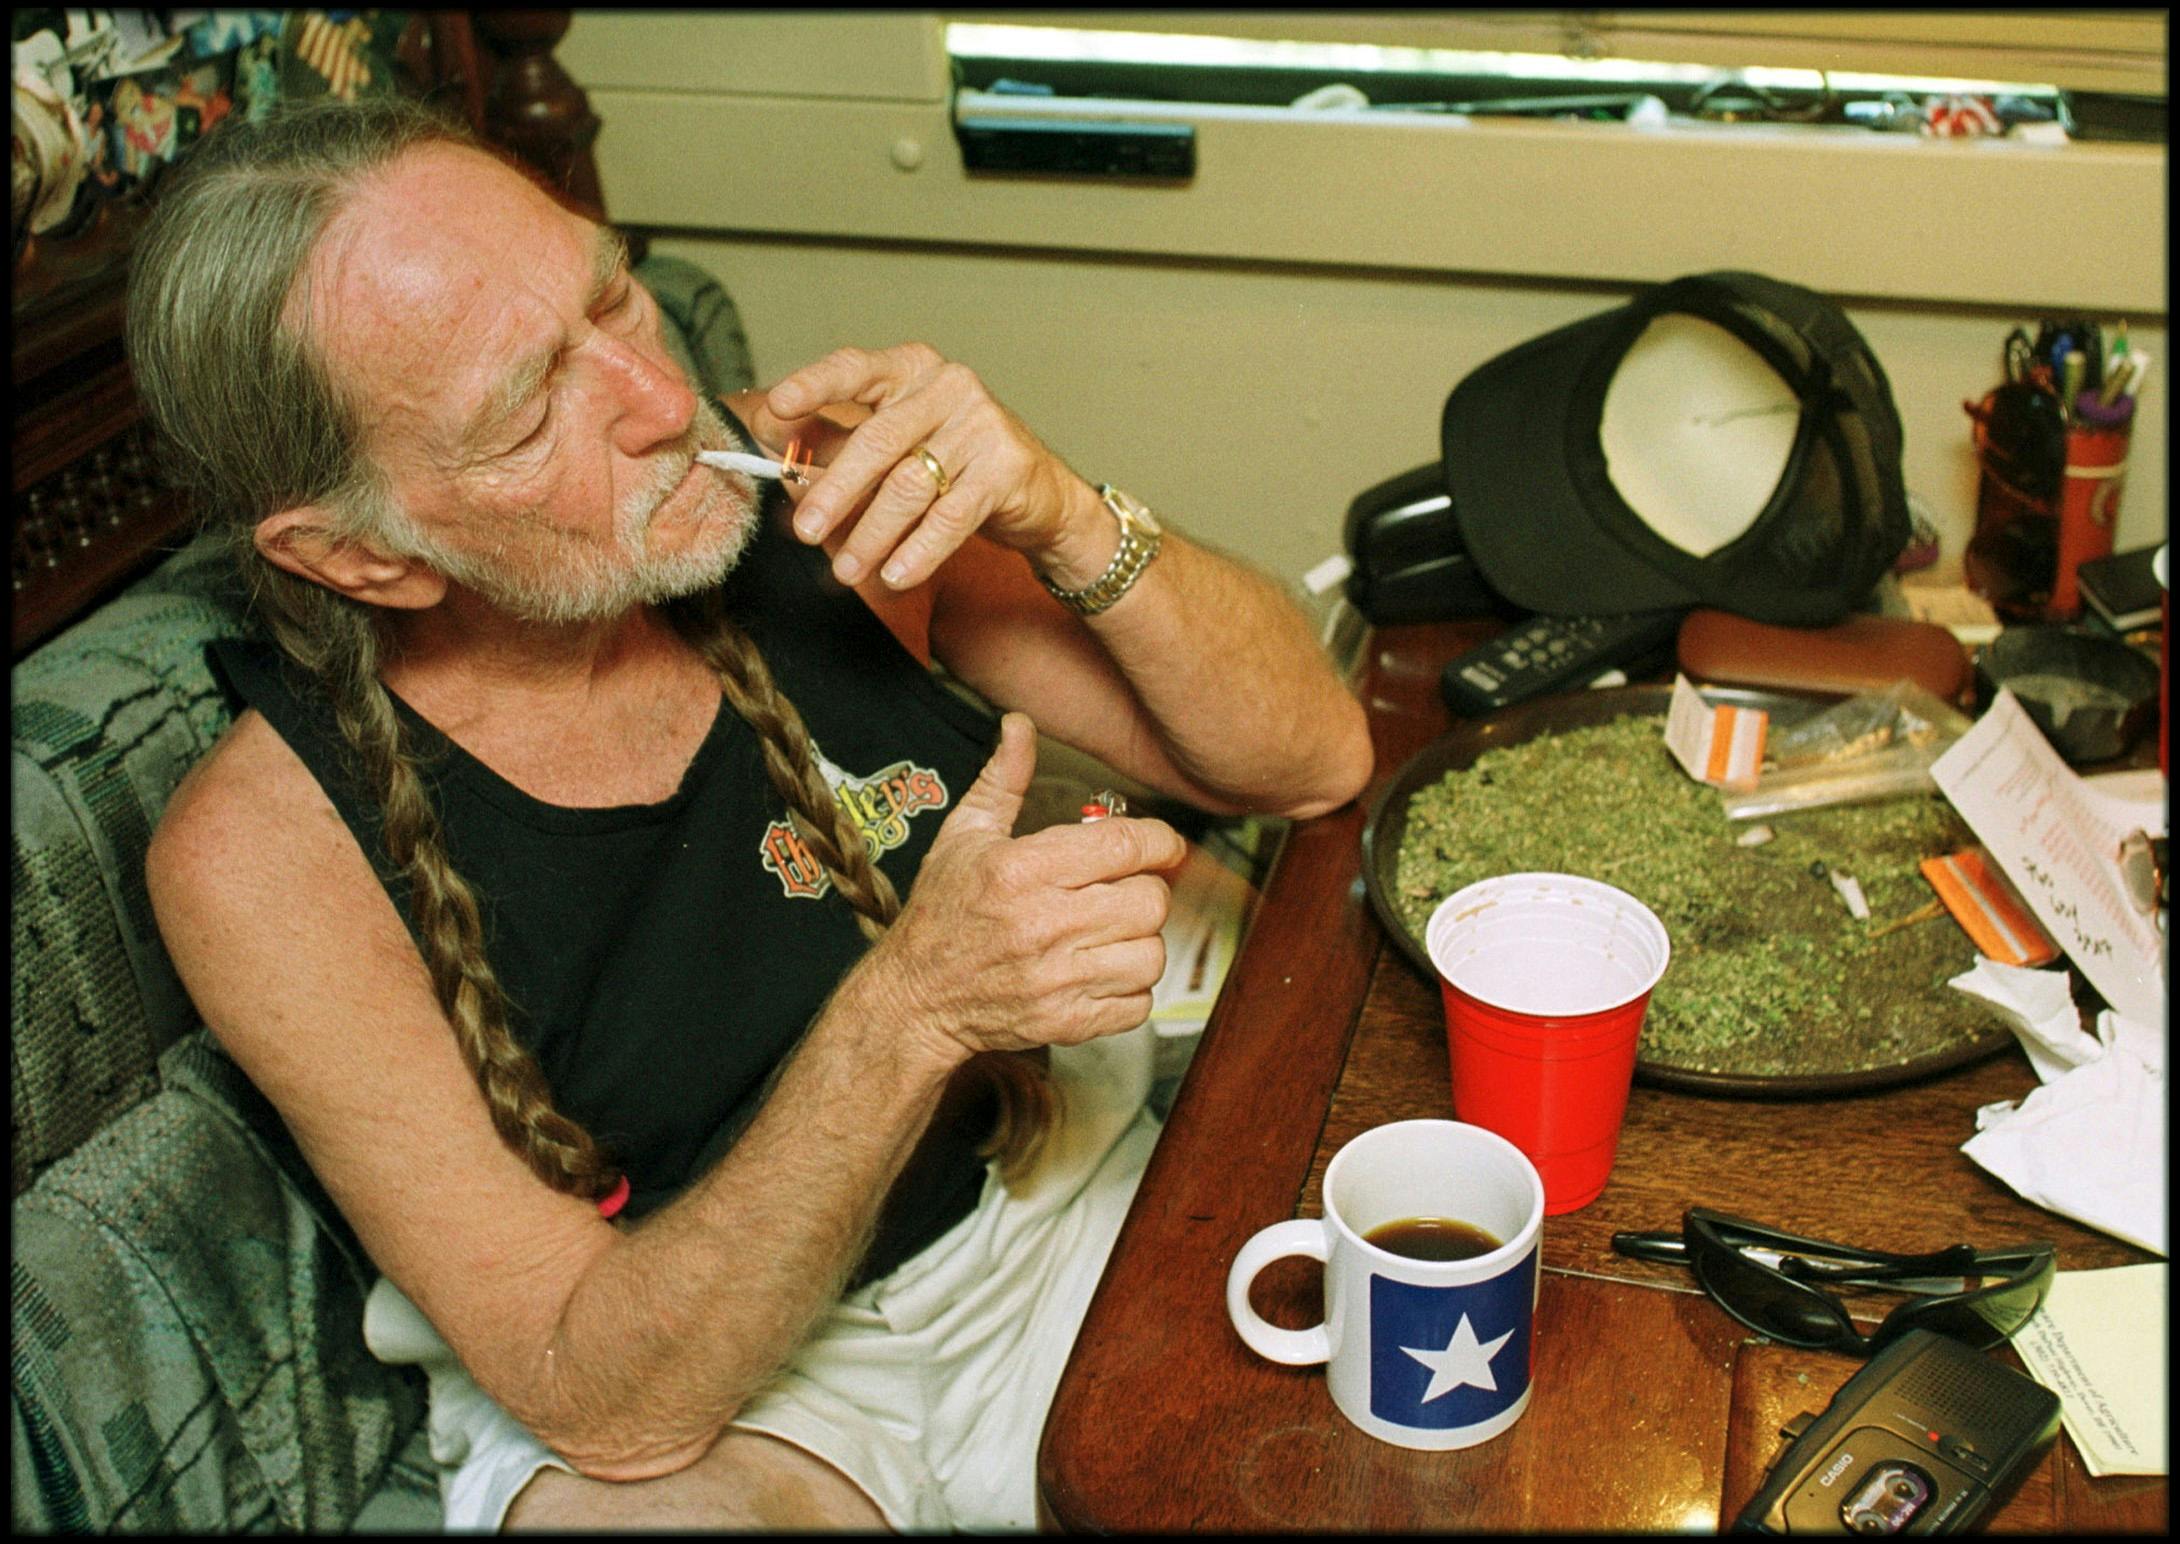 Willie Nelson Introducing the Herb Lovers Equivalent of Big Dick Energy (BDE): Big Doink Energy